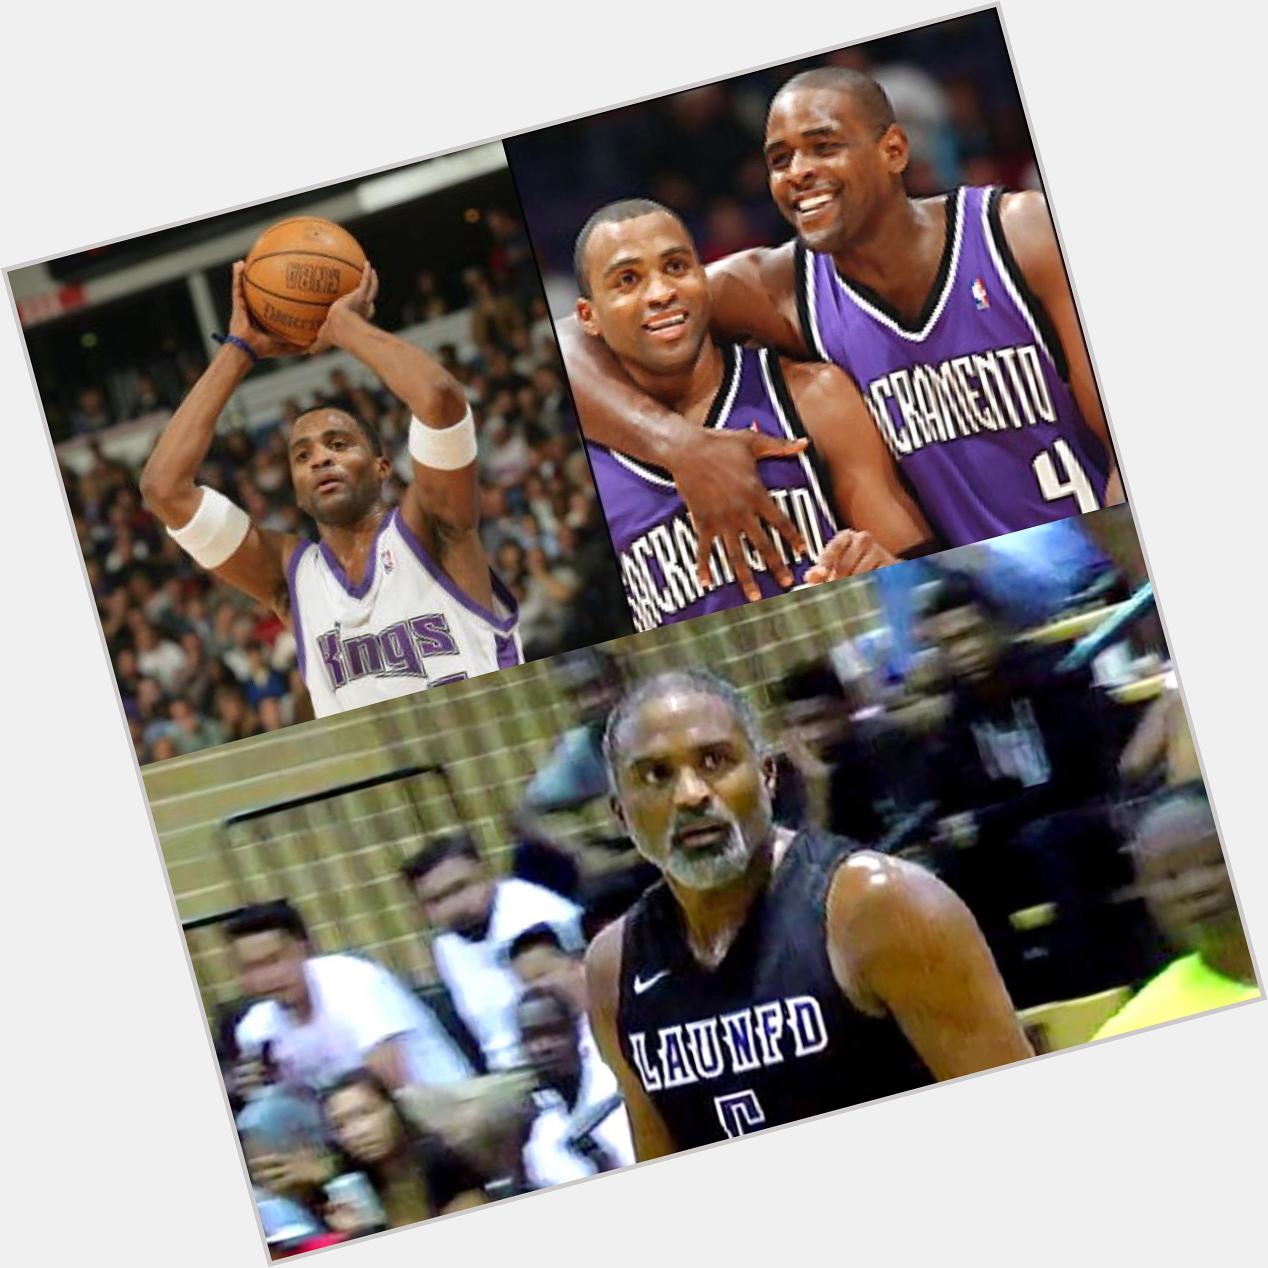 Happy 40th bday to Cuttino Mobley, who had a fun, short-lived Kings tenure. Hard to believe it was only 10 years ago. 